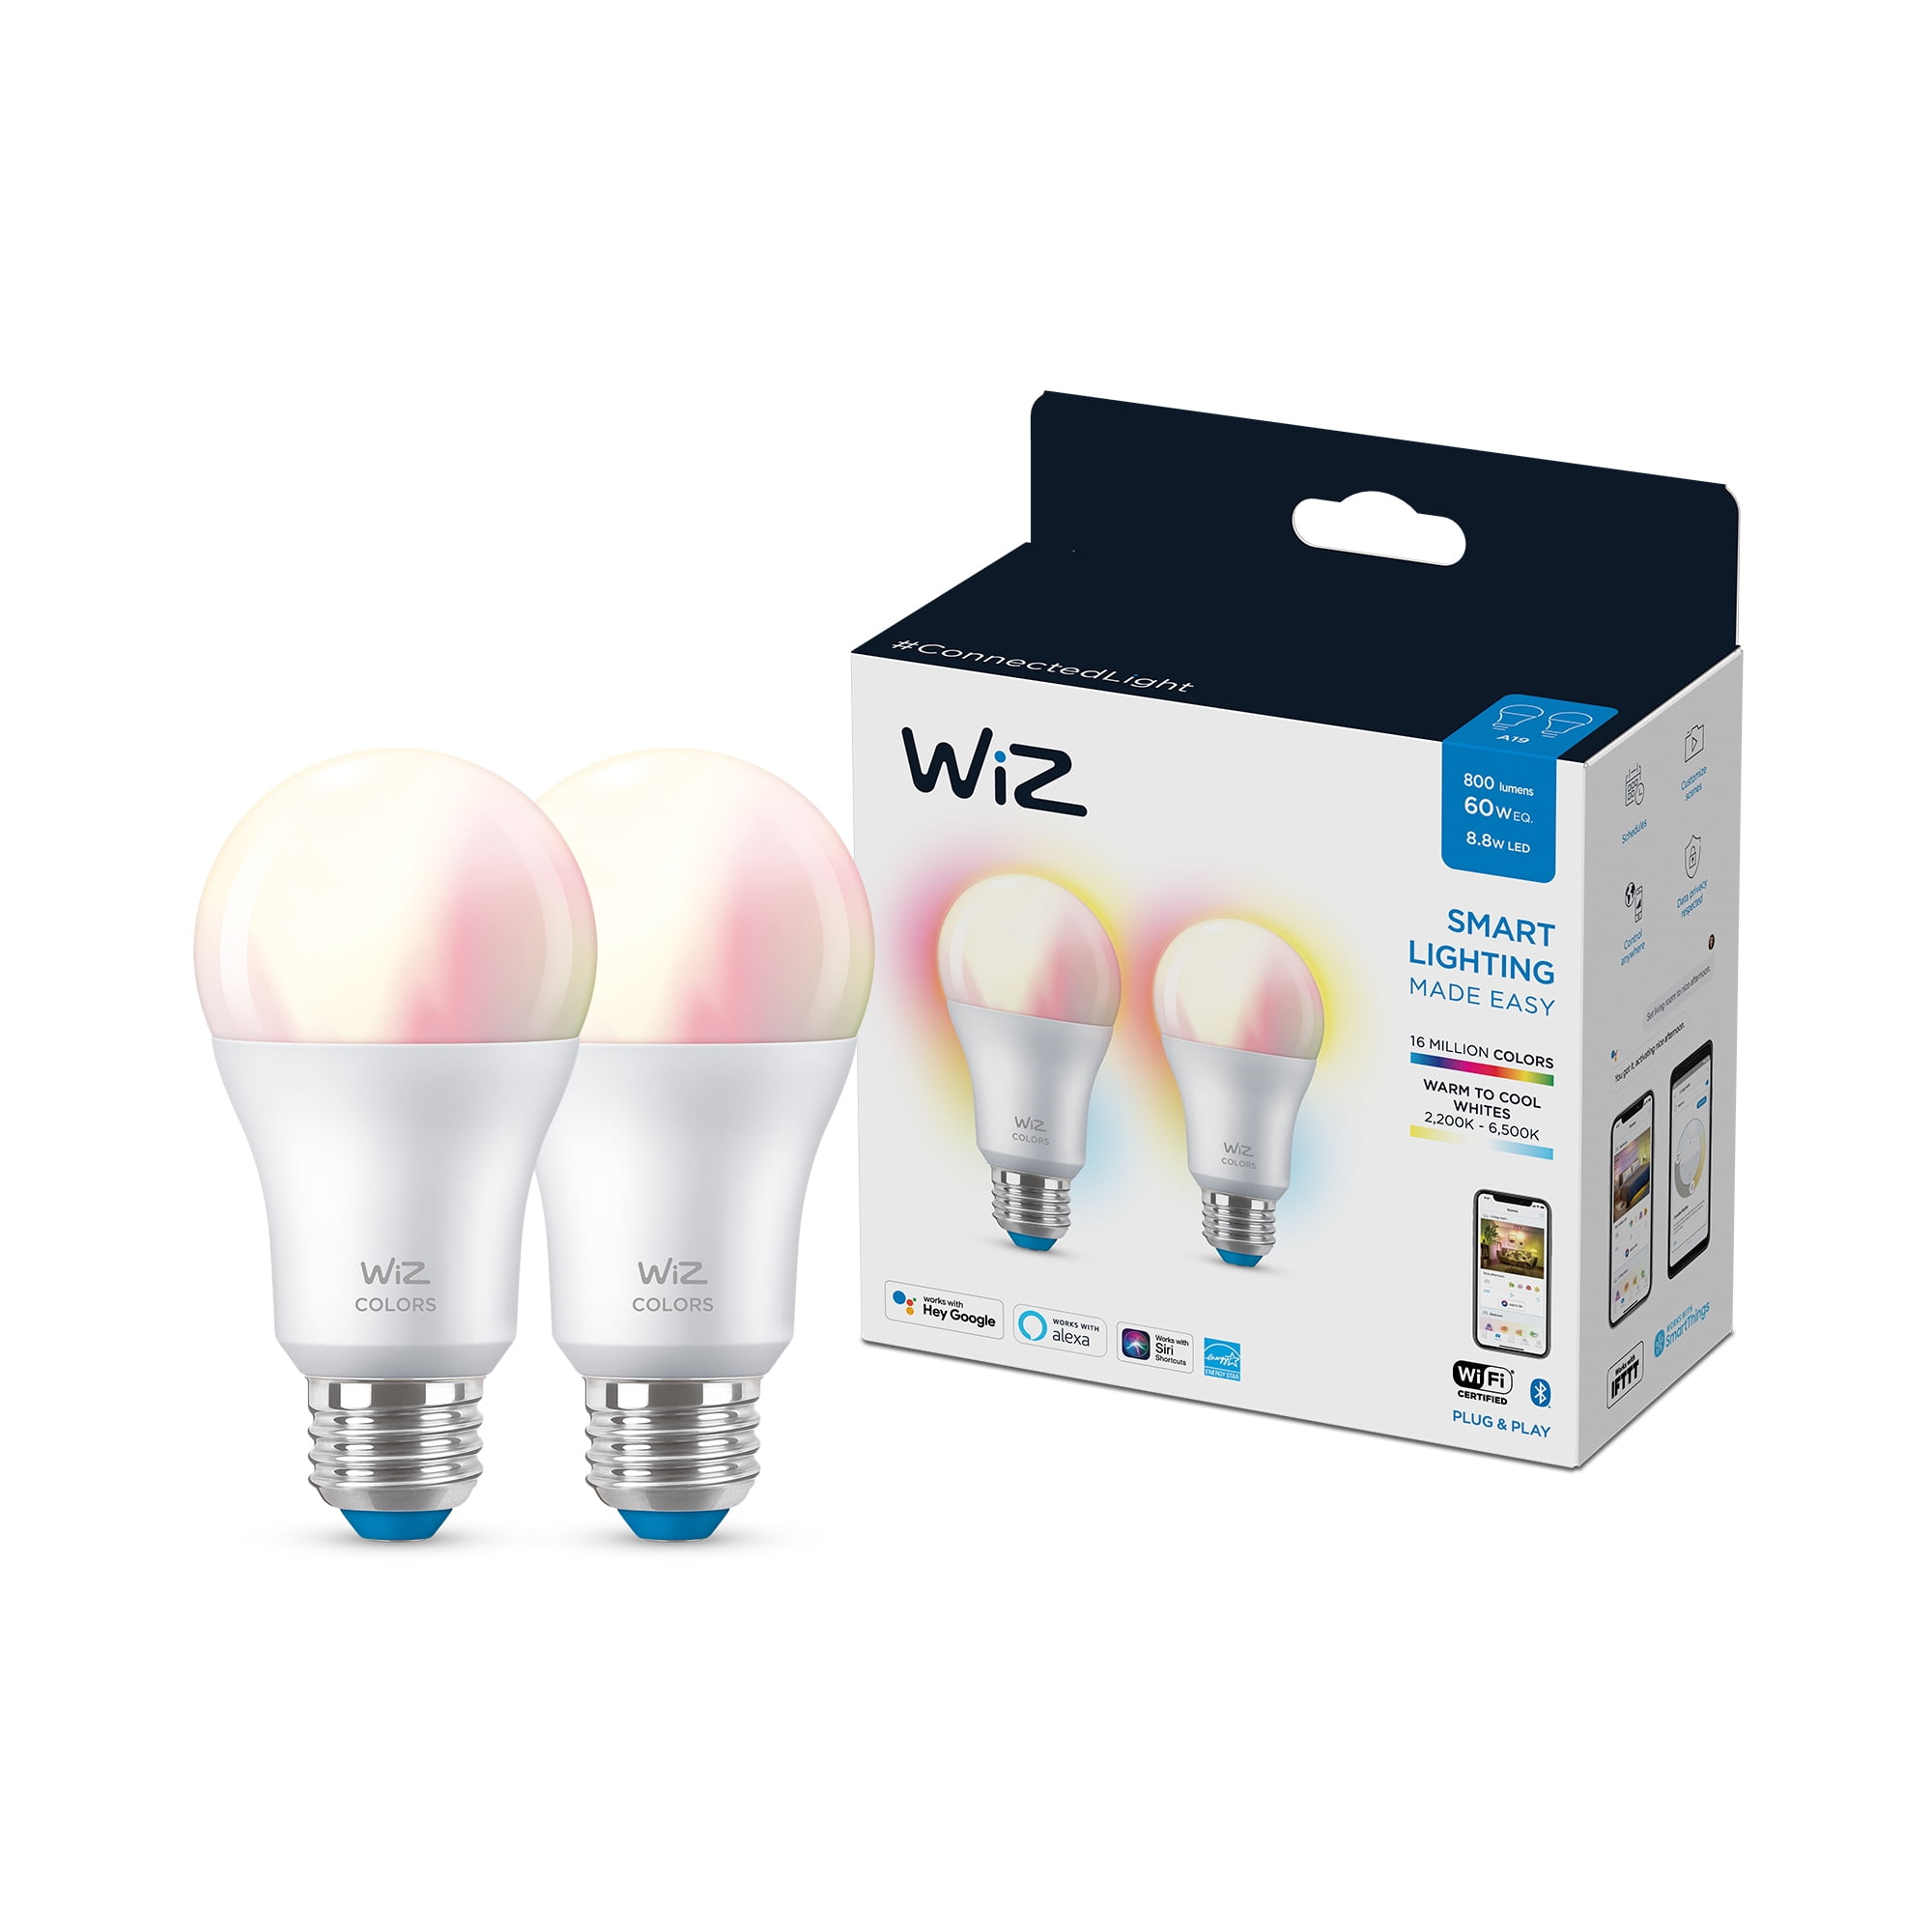 WiZ LED Smart Wi-Fi Connected 60-Watt A19 Color & Tunable White Light Bulb, Dimmable, 2-Pack